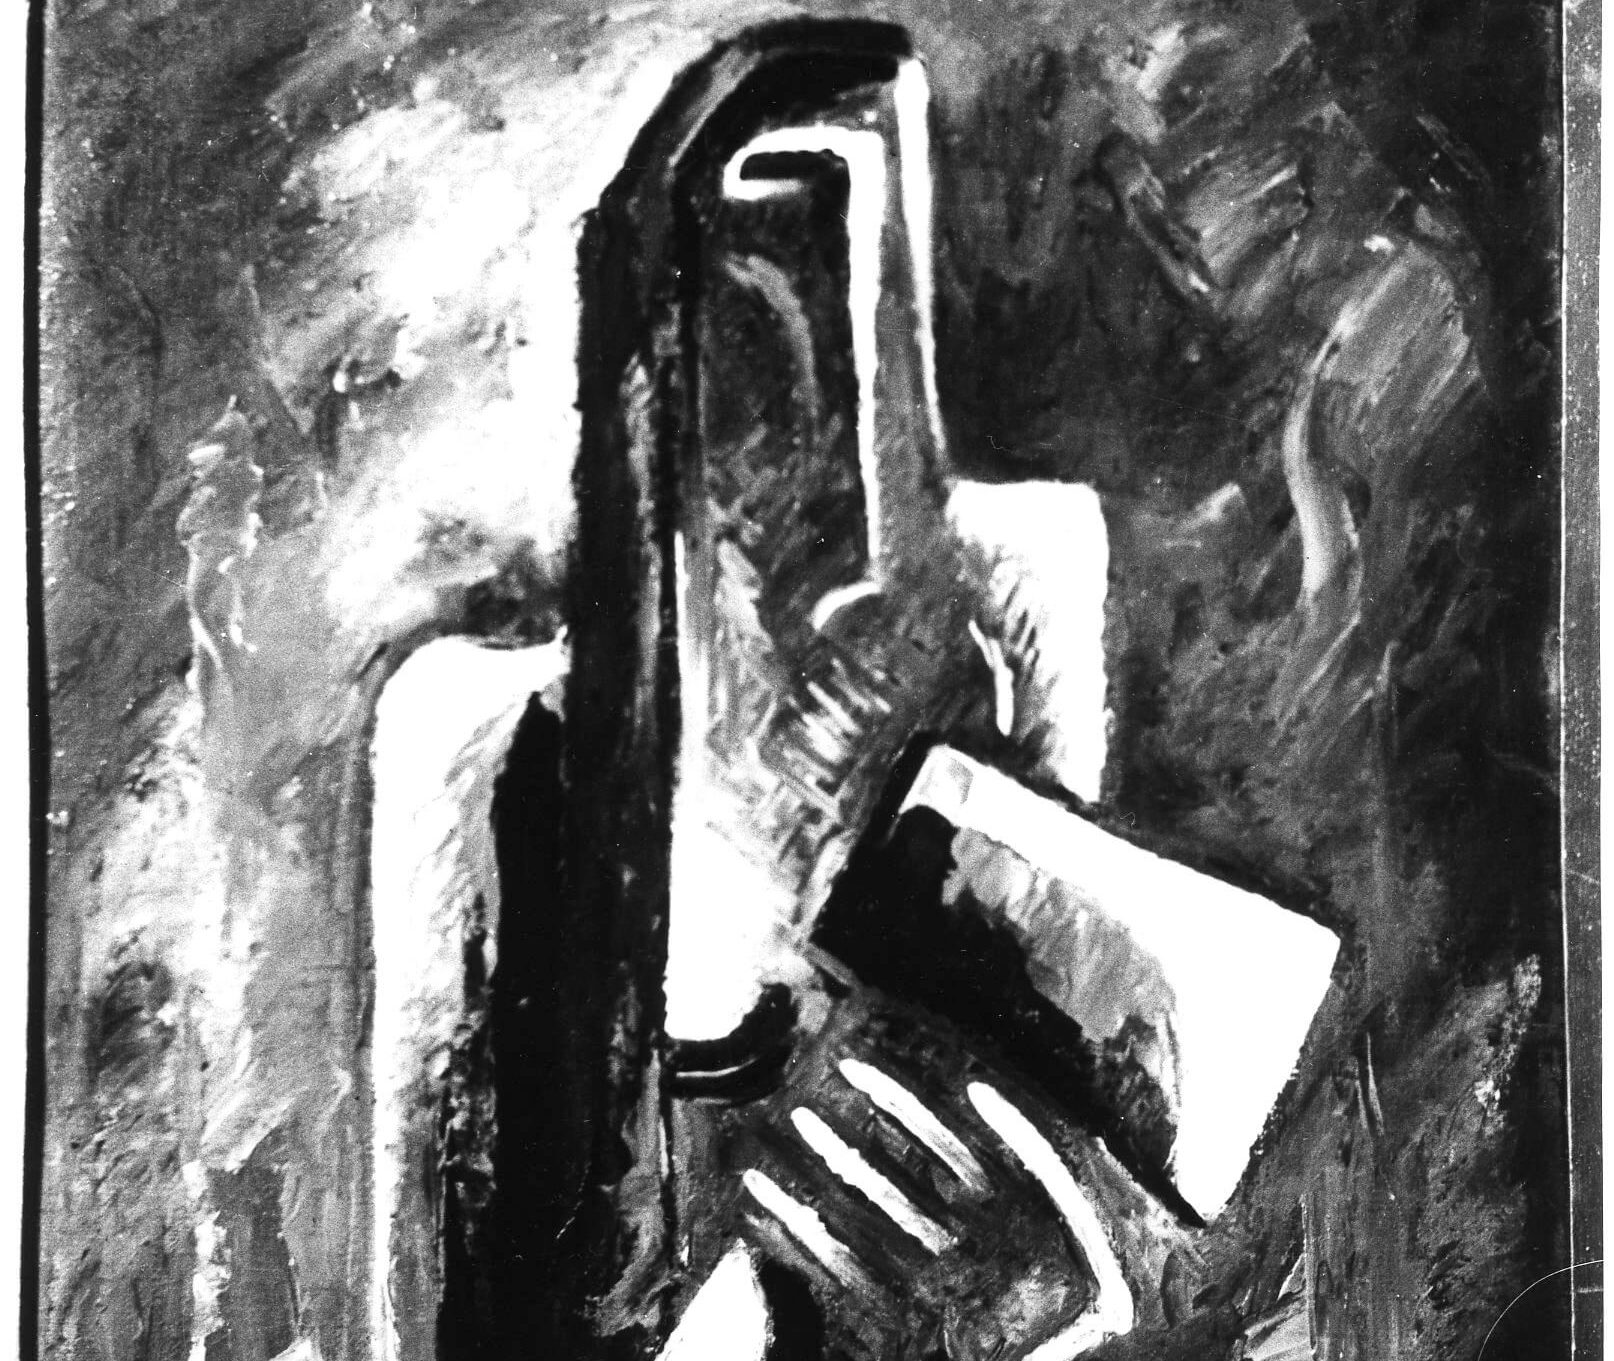 Abstract oil painting with an abstracted figure holding an axe